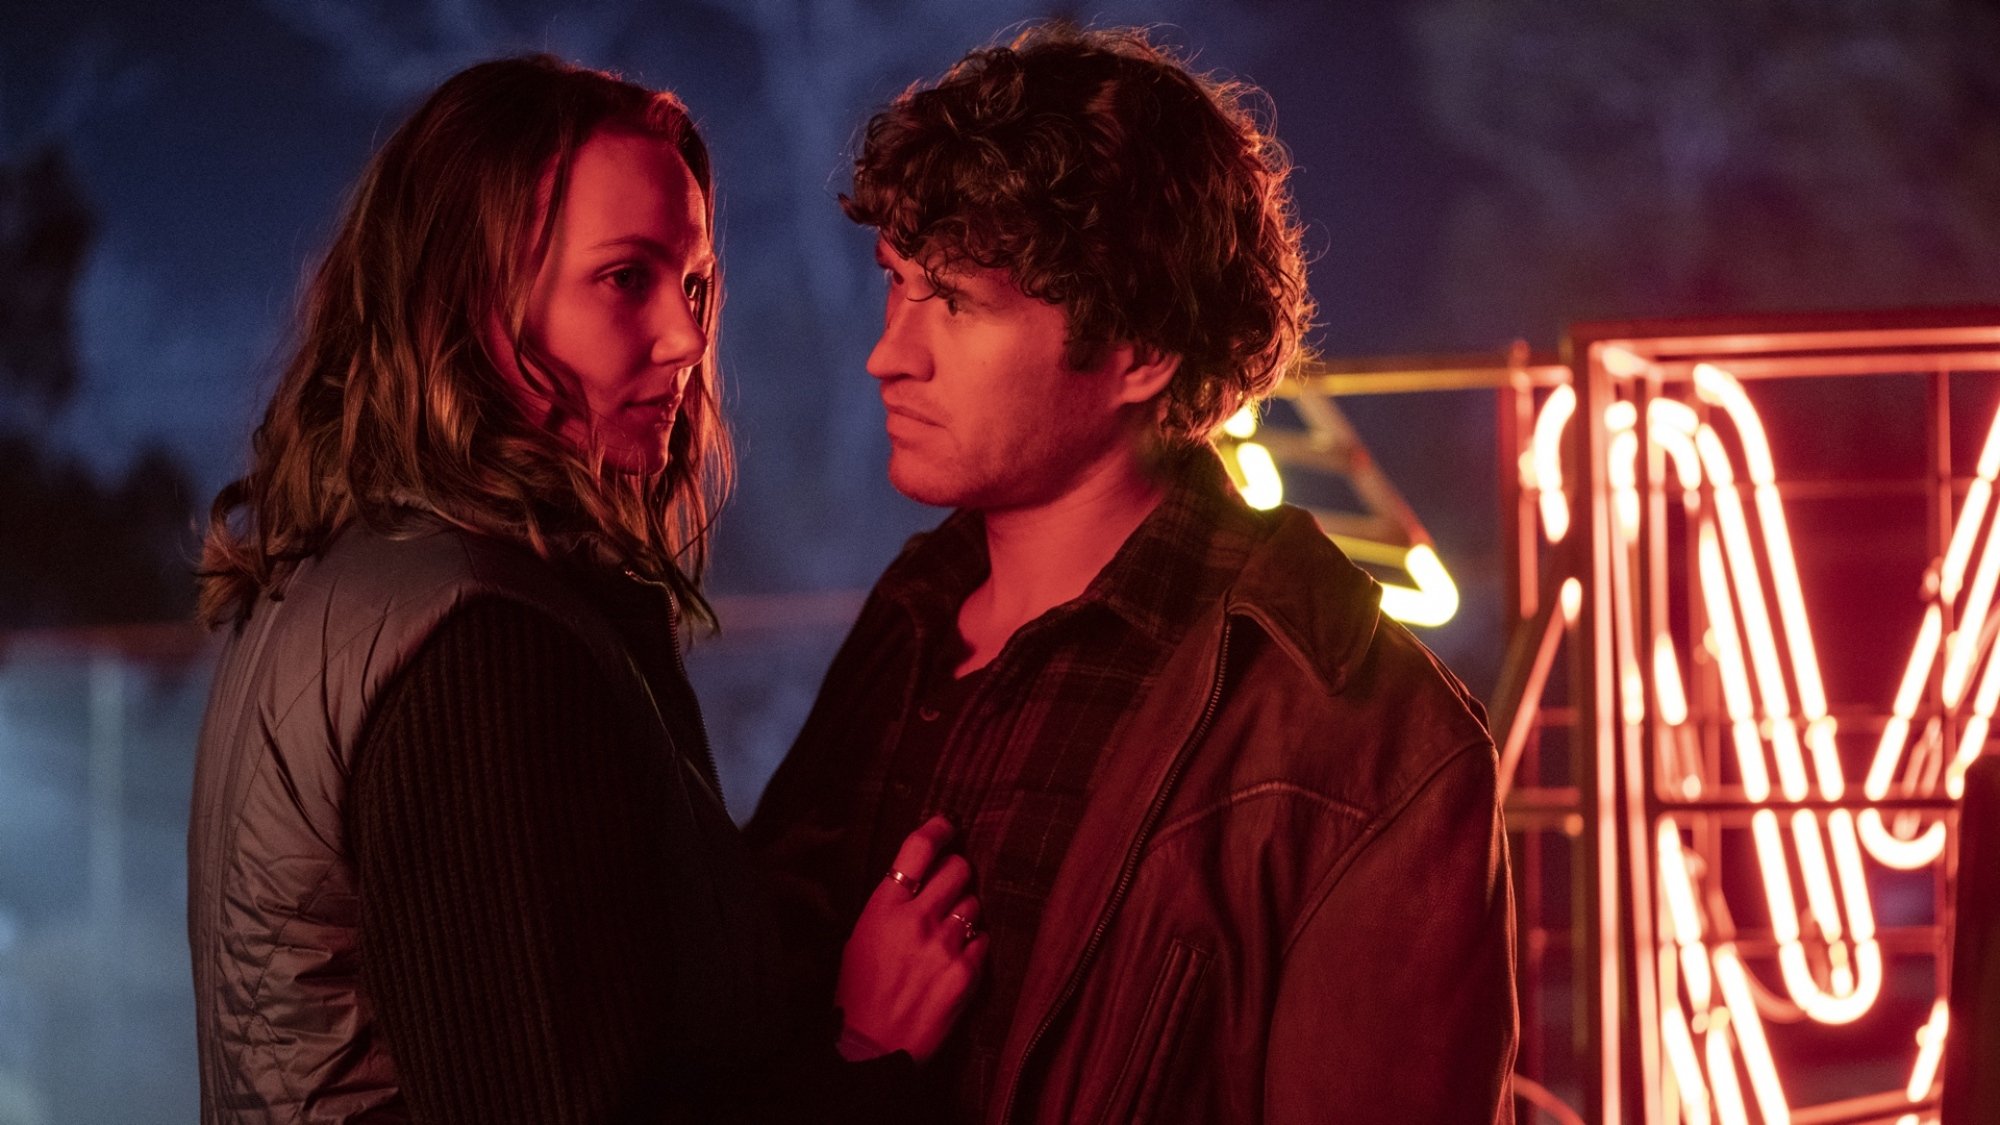 Andi Matichak and Rohan Campbell in "Halloween Ends"